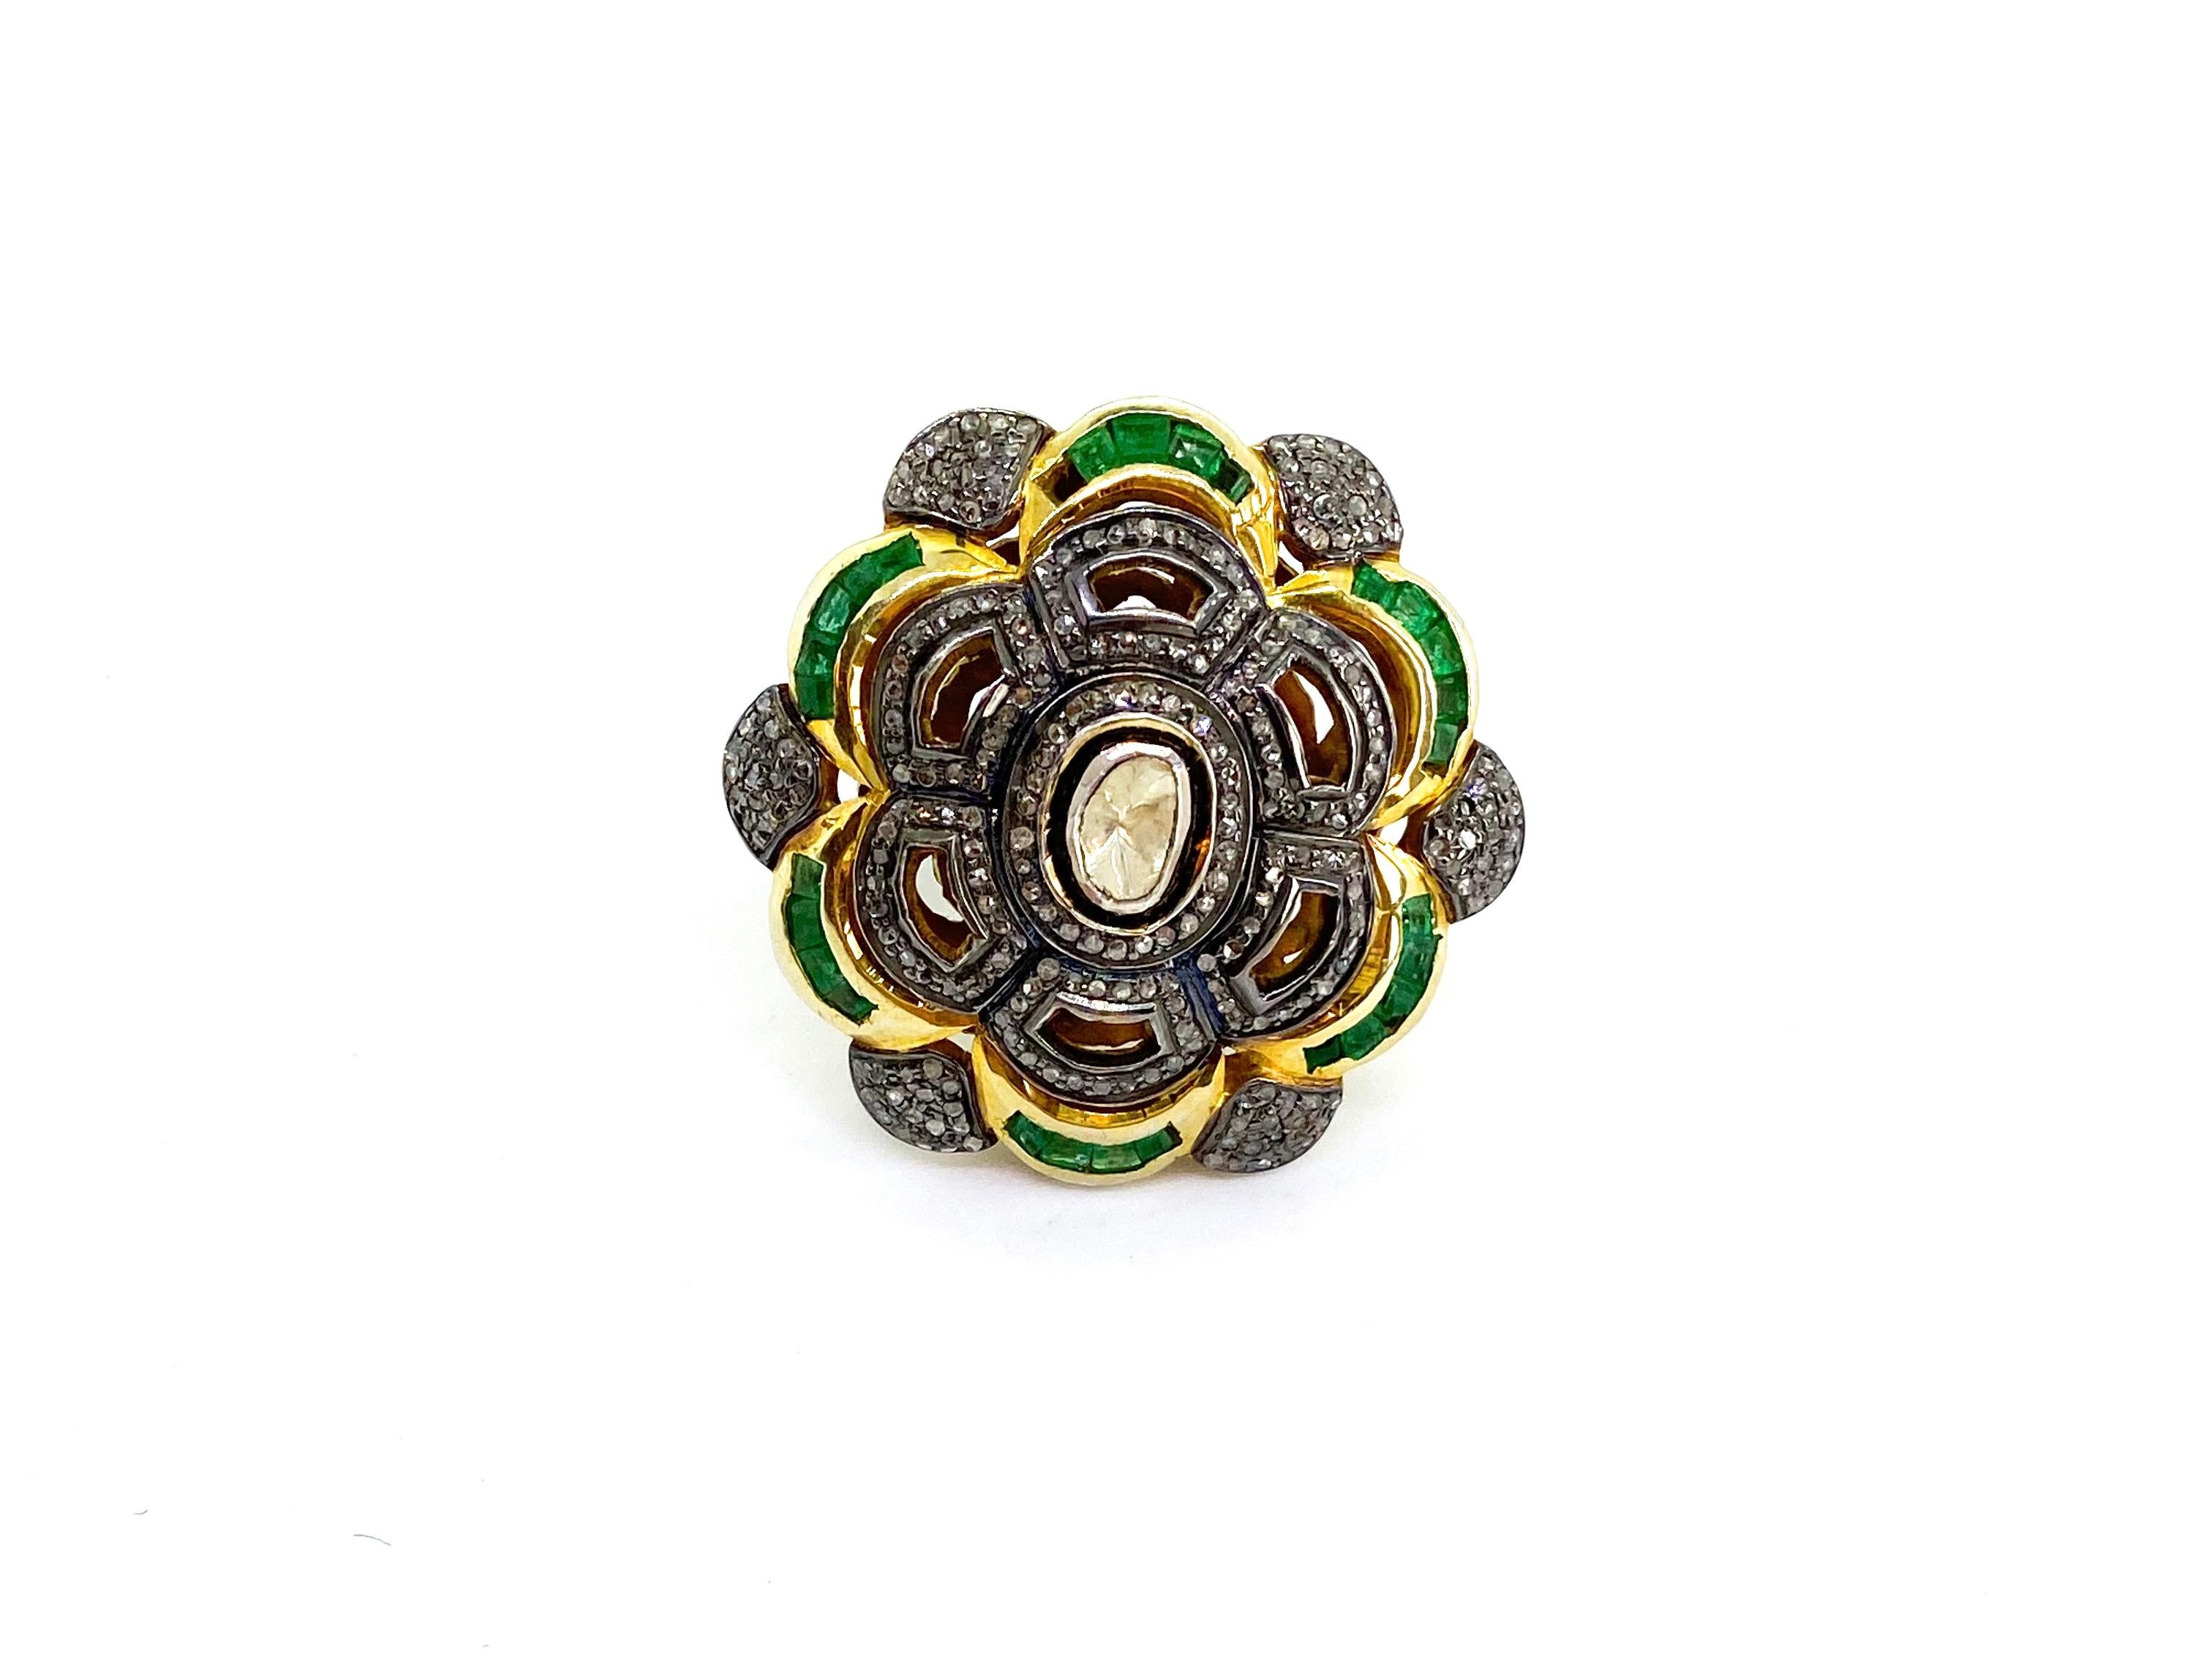 Indian Emerald and Diamond Cocktail Ring.
History of this jewelry, Purchased sometime in the early 2000s from India Goa by a Pakistani Gemstone Merchant.
Jewelry Silver and Gold Plated?
I don’t know about Indian jewelry, whether those diamonds are